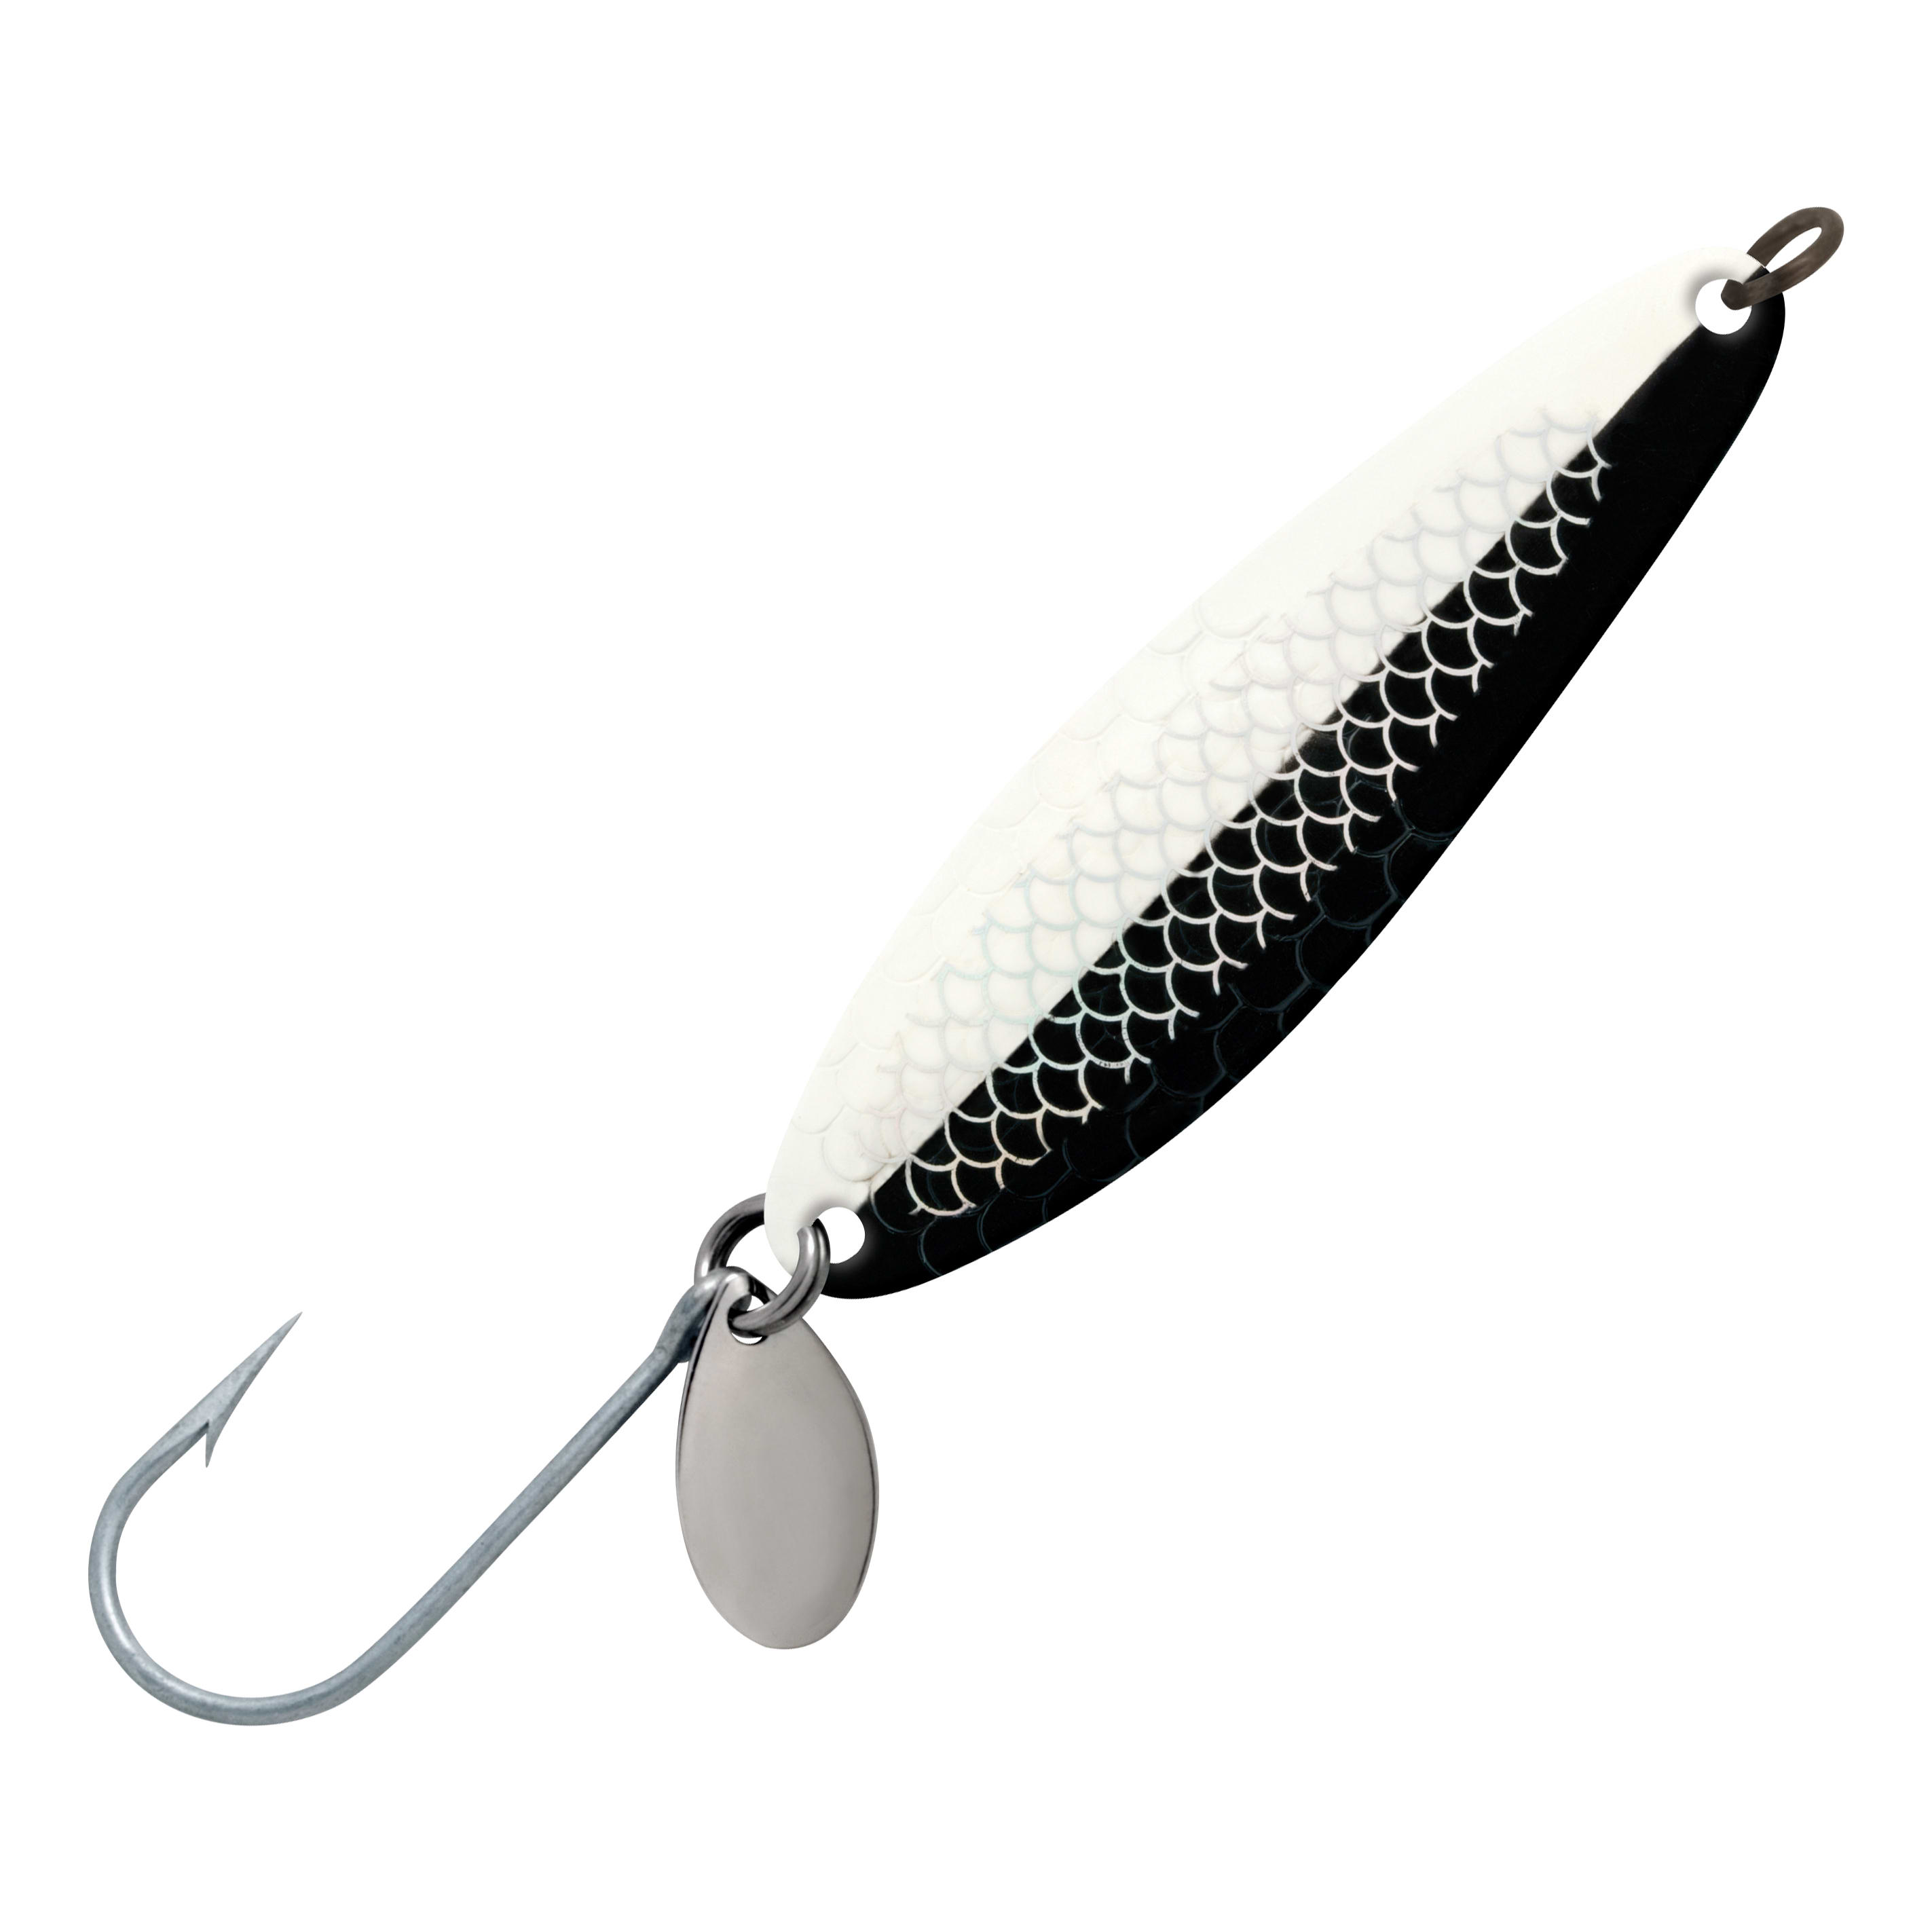 Fishing Spoons Fishing Lures Trout Lures, Fishing Spoons Lures for